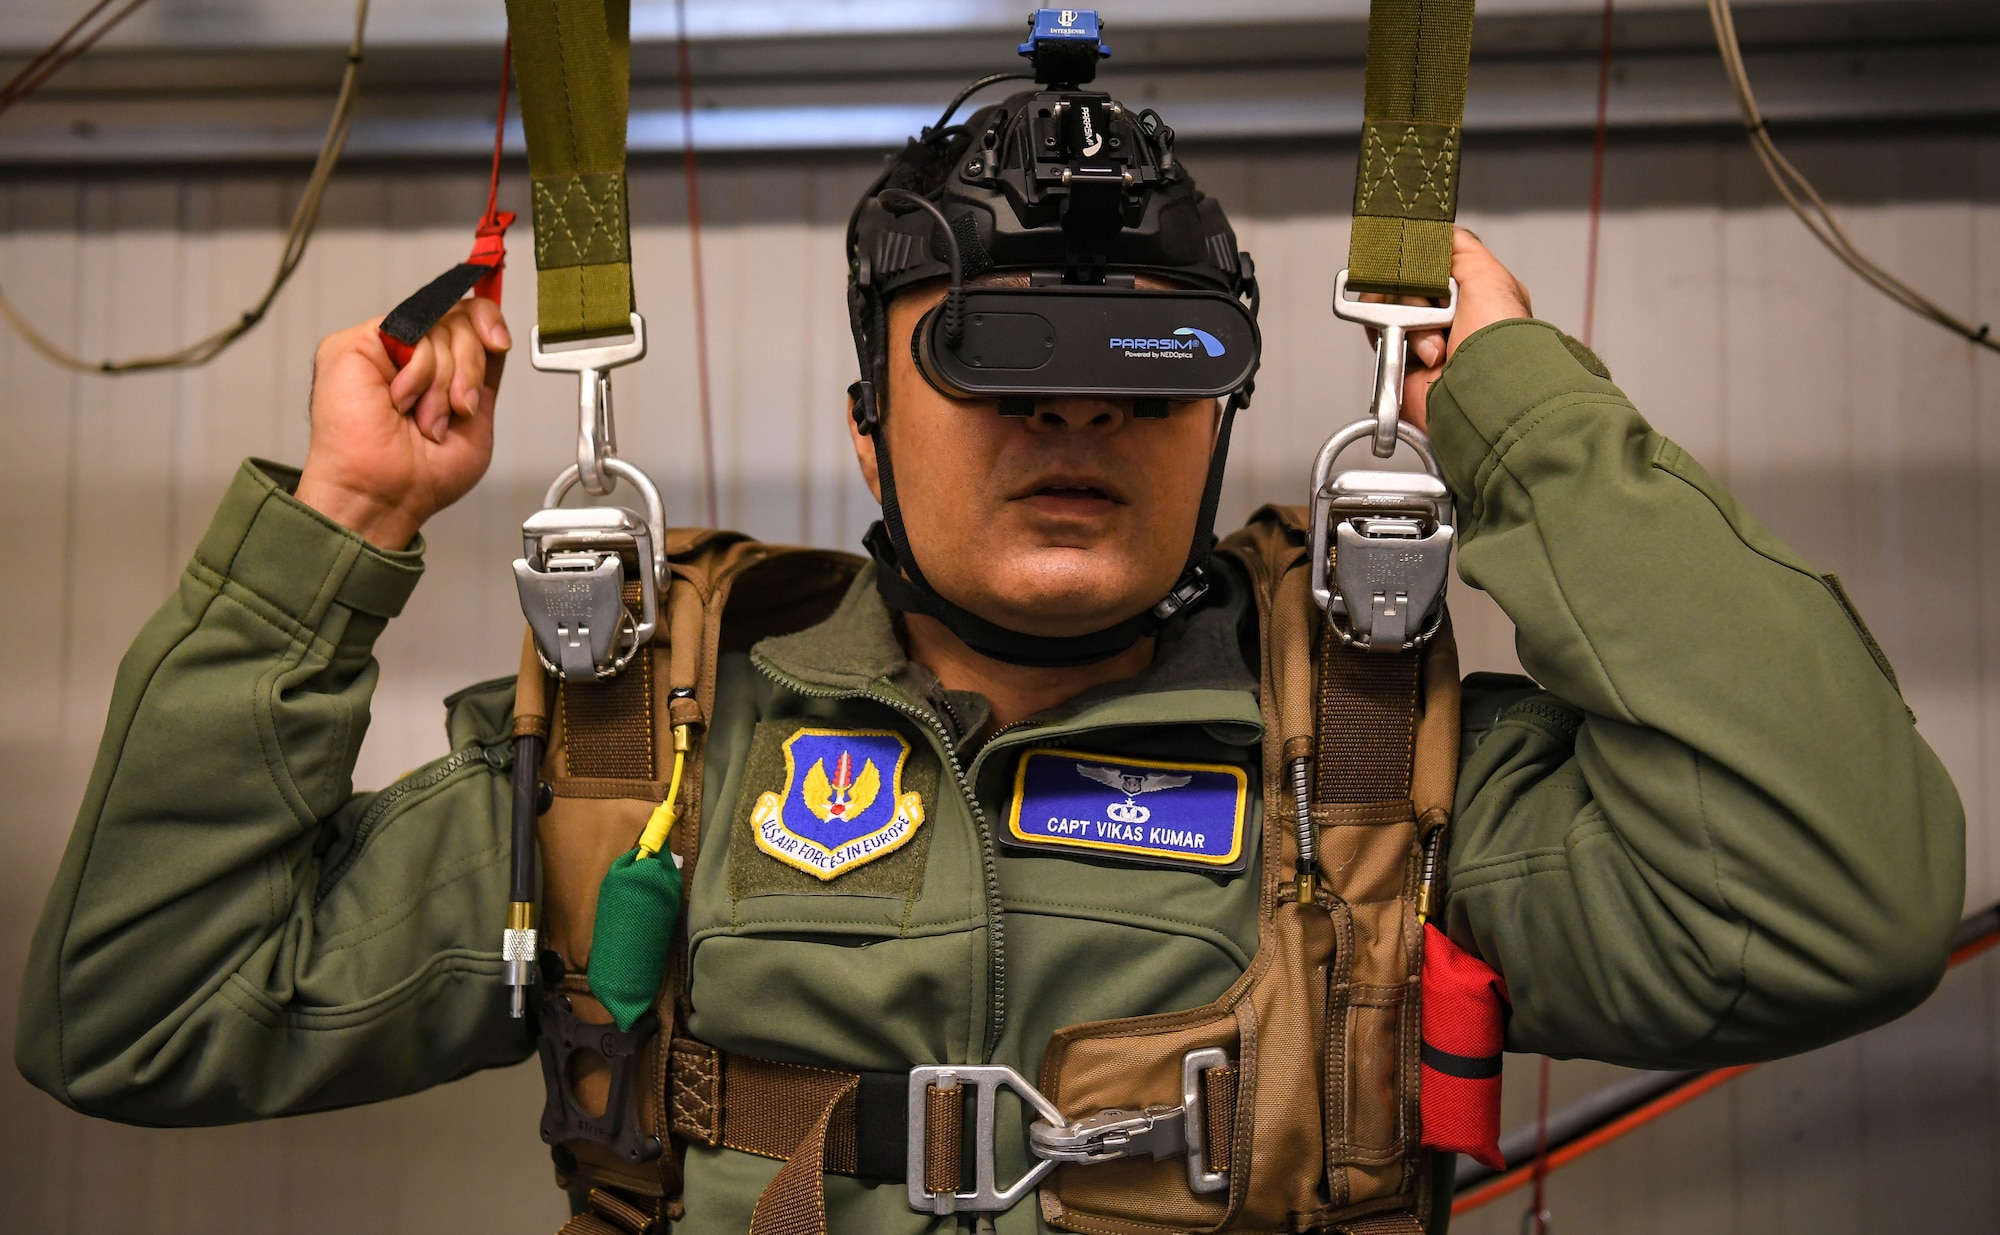 U.S. Air Force Capt. Vikas Kumar, 86th Operations Support Squadron aircrew flight equipment chief wing aerospace physiologist, undergoes the practical portion of an emergency parachute training course at Ramstein Air Base, Germany, Jan. 27, 2022. The parasim is a virtual reality parachute training simulator that allows the trainee to experience an emergency parachute event in a controlled environment. (U.S. Air Force photo by Airman 1st Class Jared Lovett)